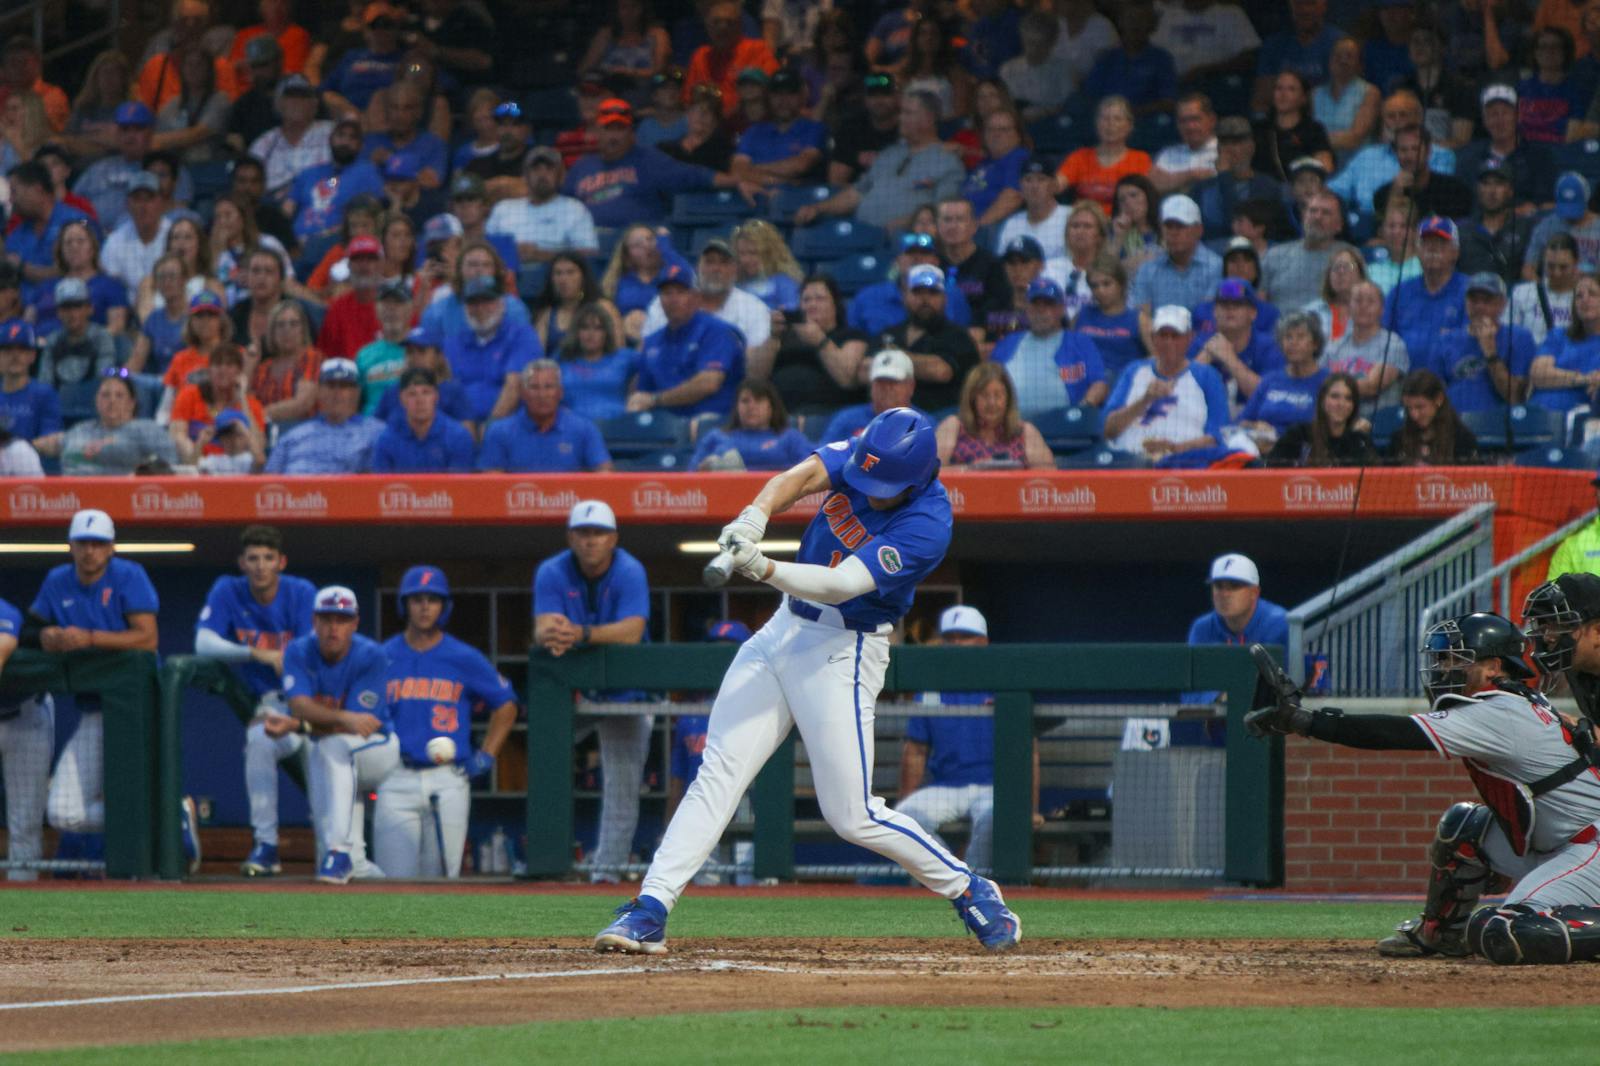 Caglianone deals, Gators provide run support to take series against Miami -  The Independent Florida Alligator